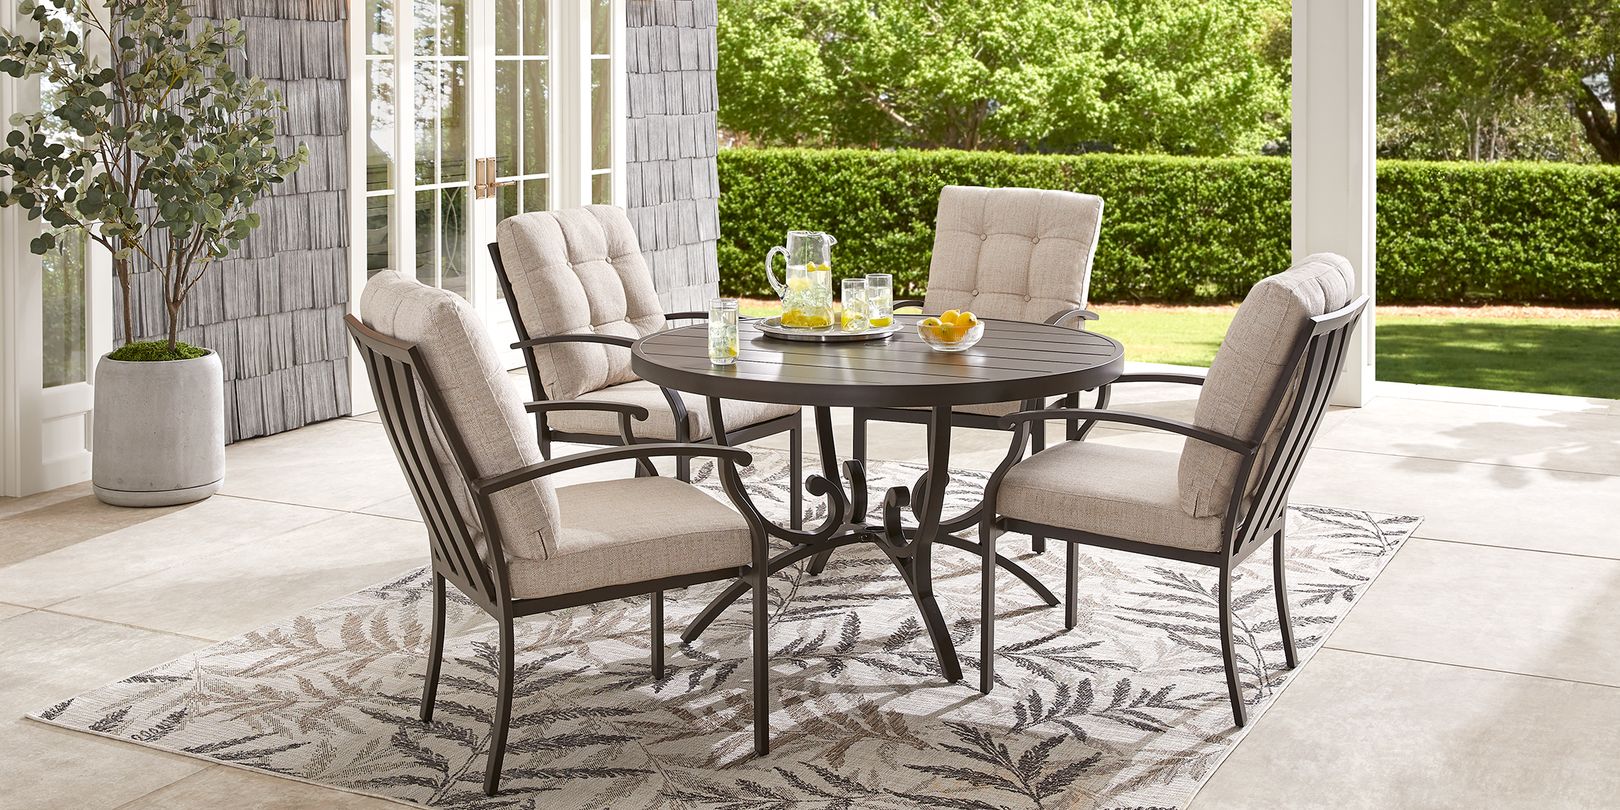 Photo of Brown Outdoor Dining Set with Thick Beige Cushions